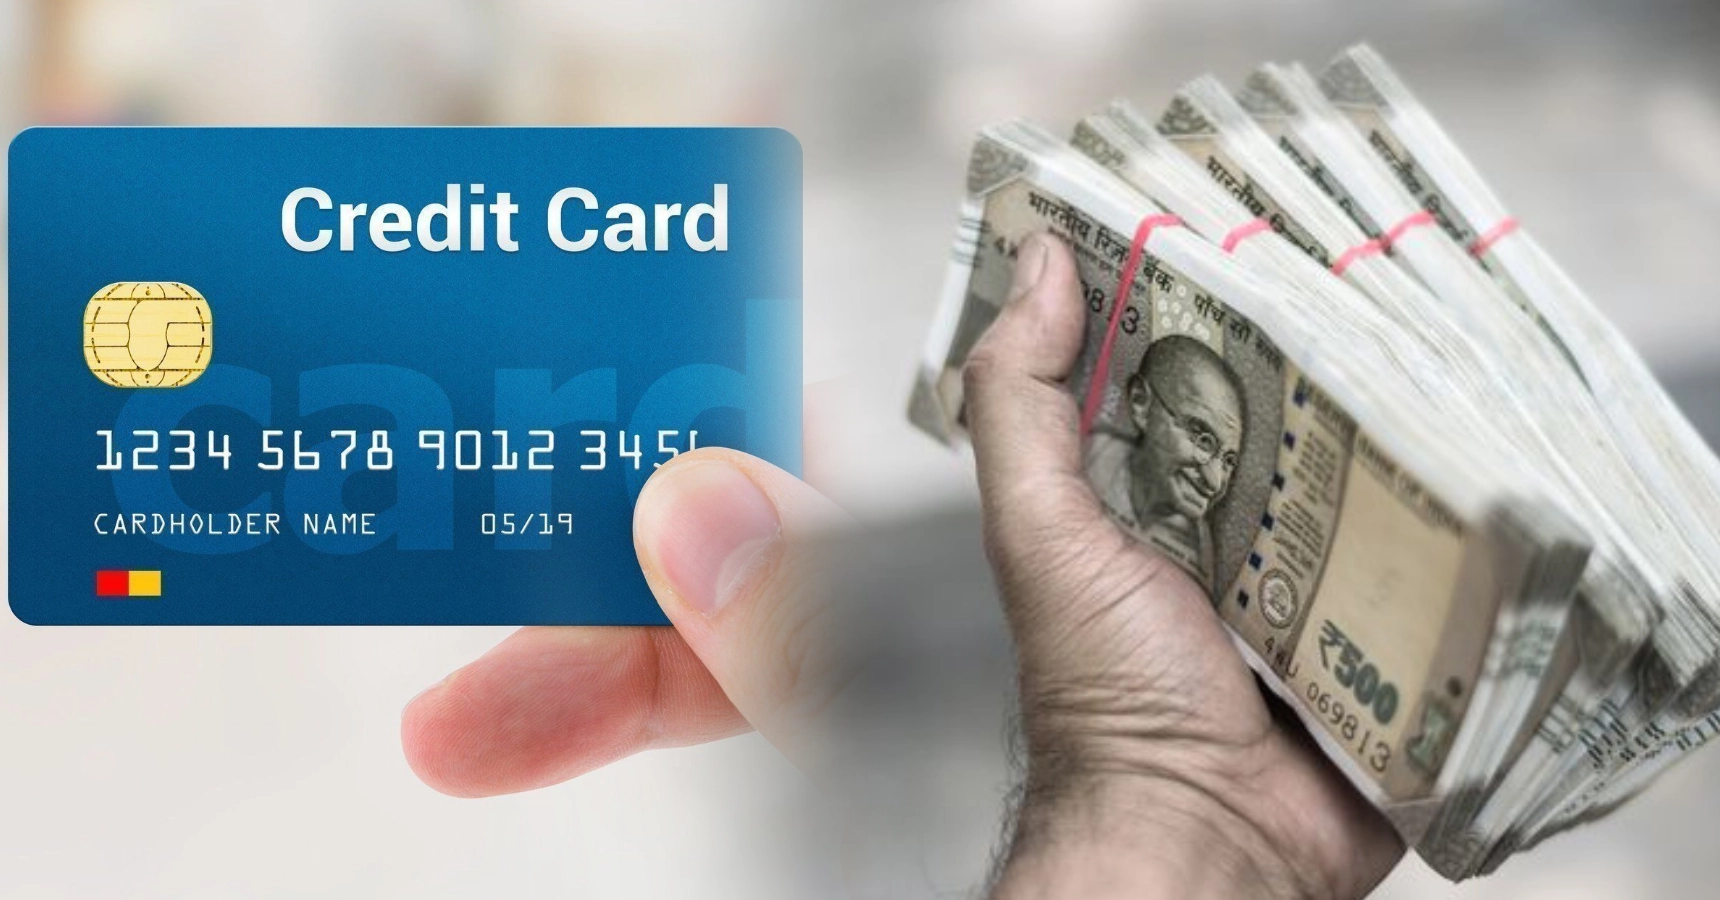 By paying credit card bill through these apps u can get good amount of money in your pocket